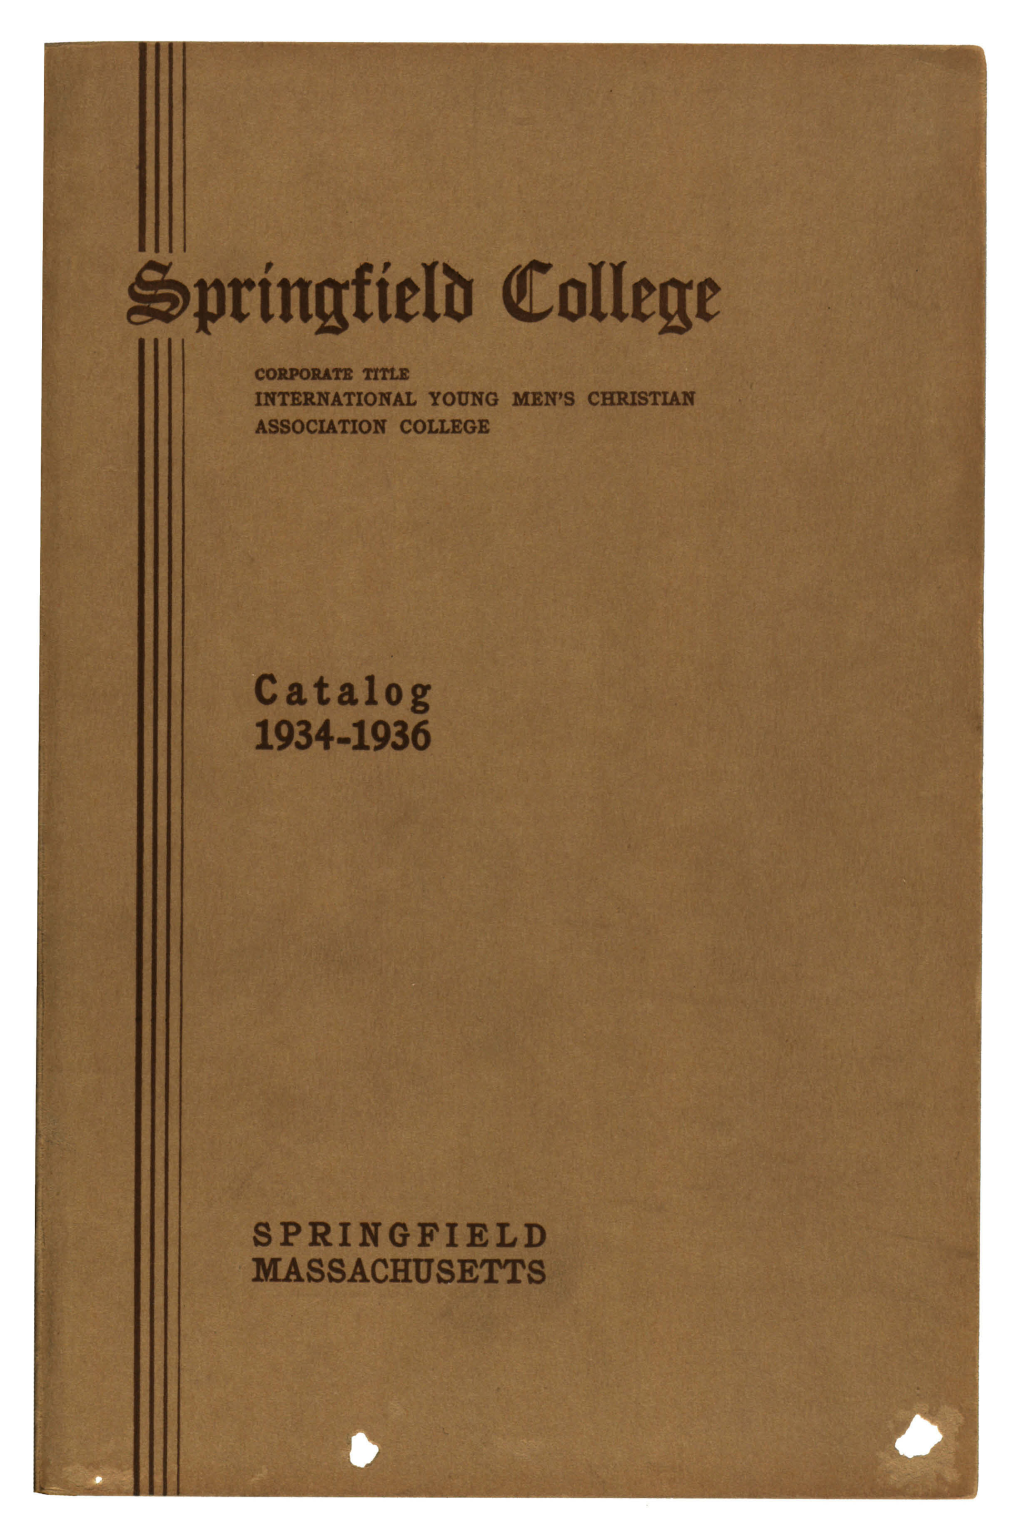 Springfield College Digital Collections